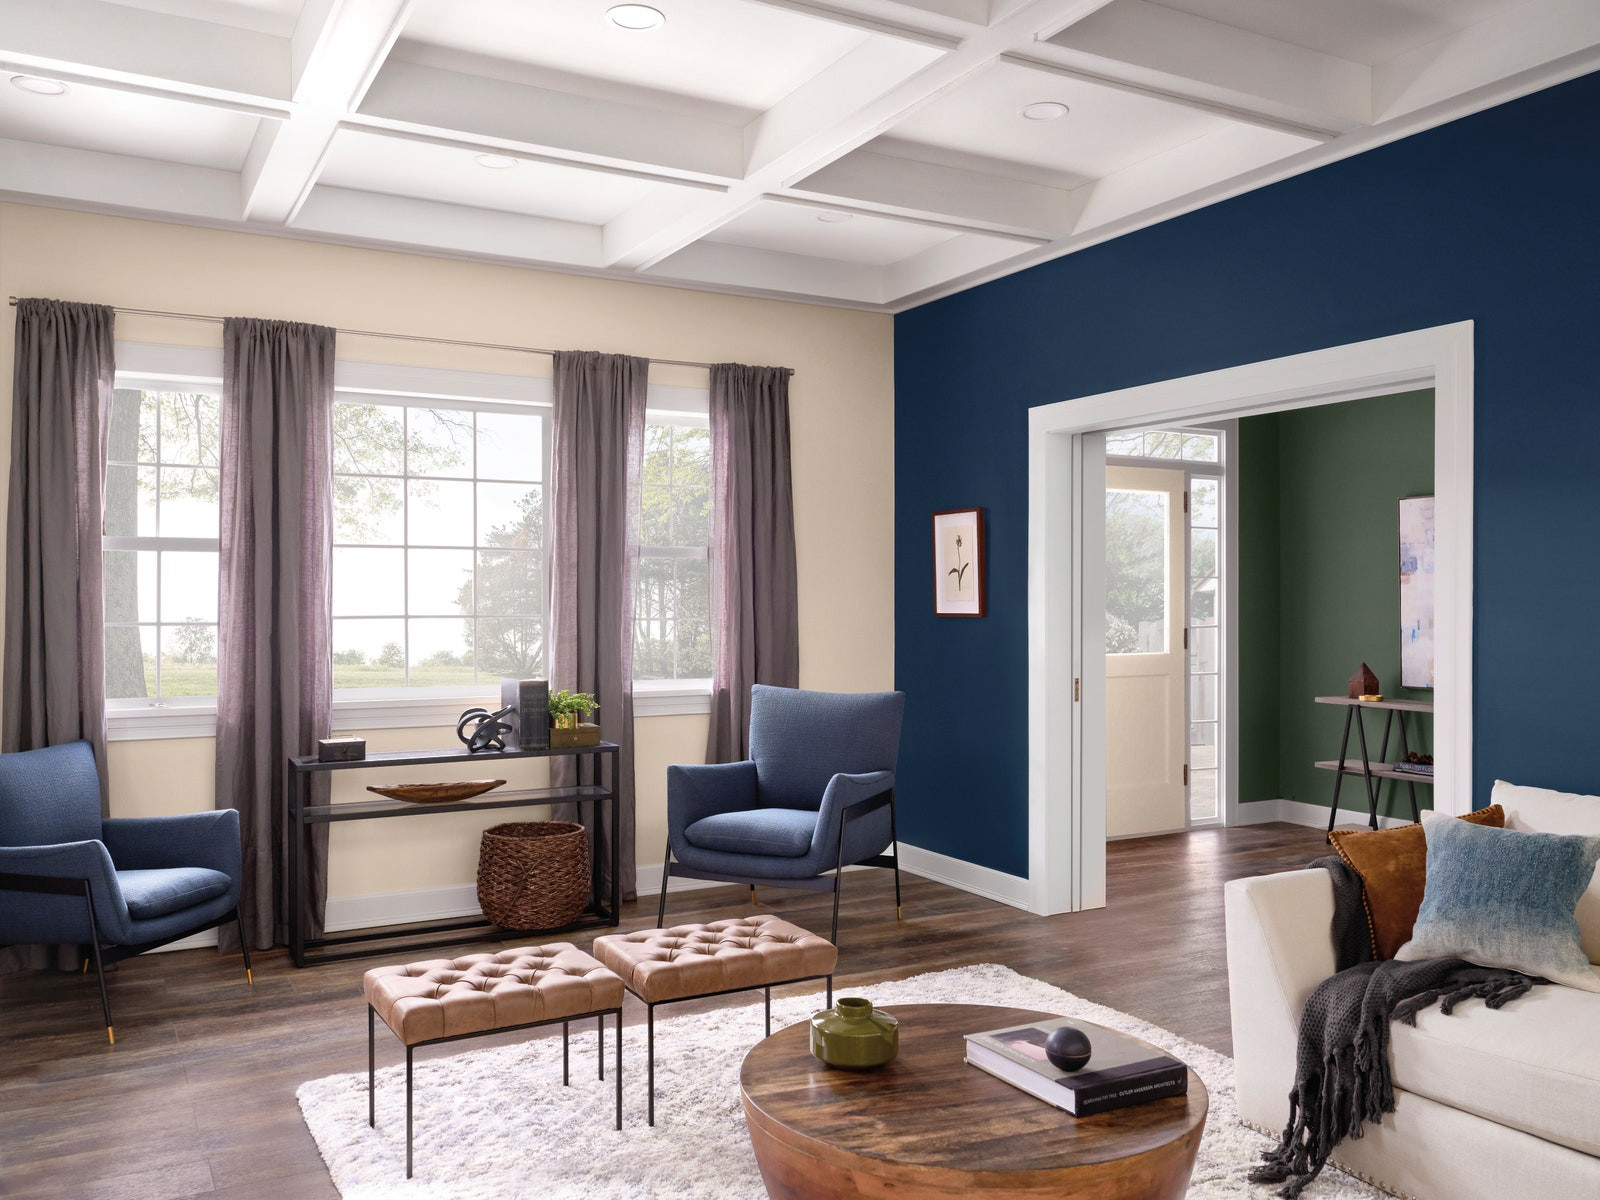 Popular Living Room Colors 2020
 The Color Trends We’ll Be Seeing in 2020 According to